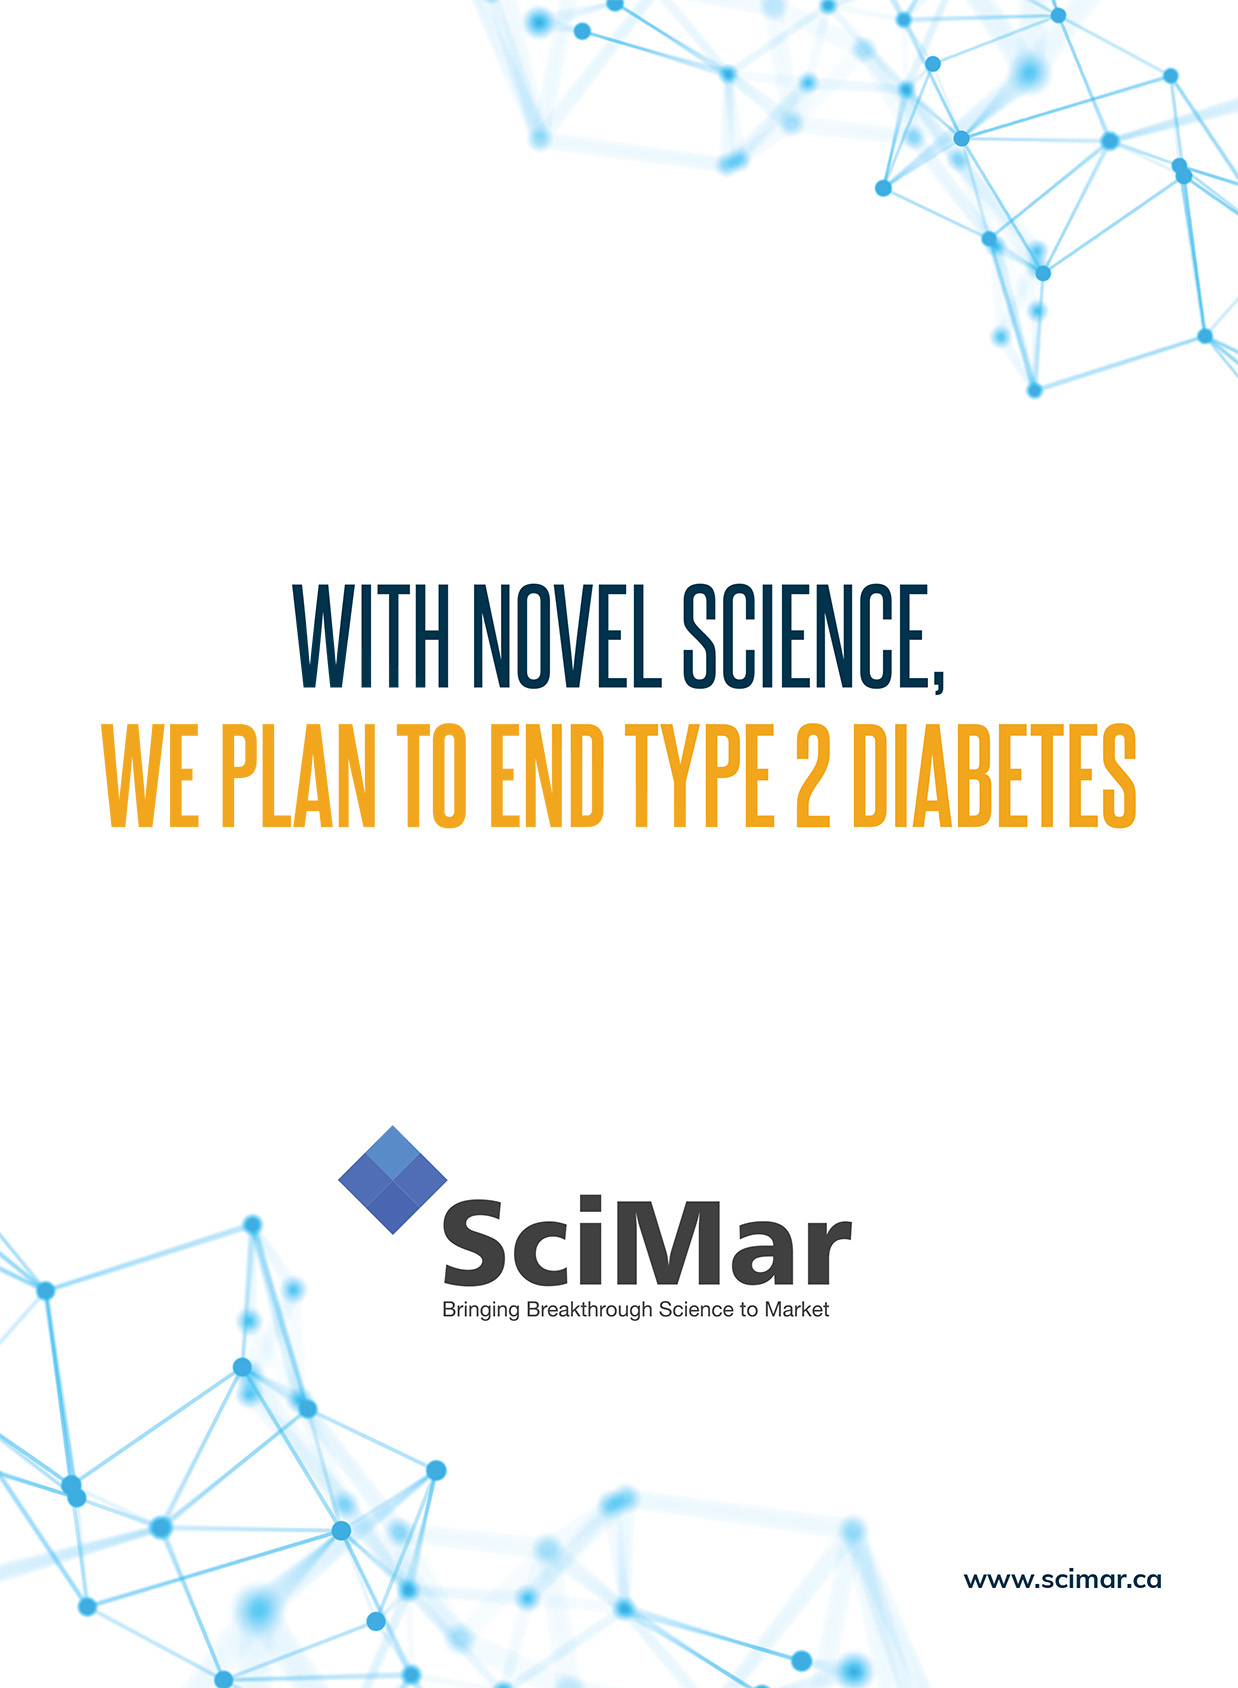 SciMar corporate brochure front cover - "With Novel Science, we plan to end type 2 diabetes"